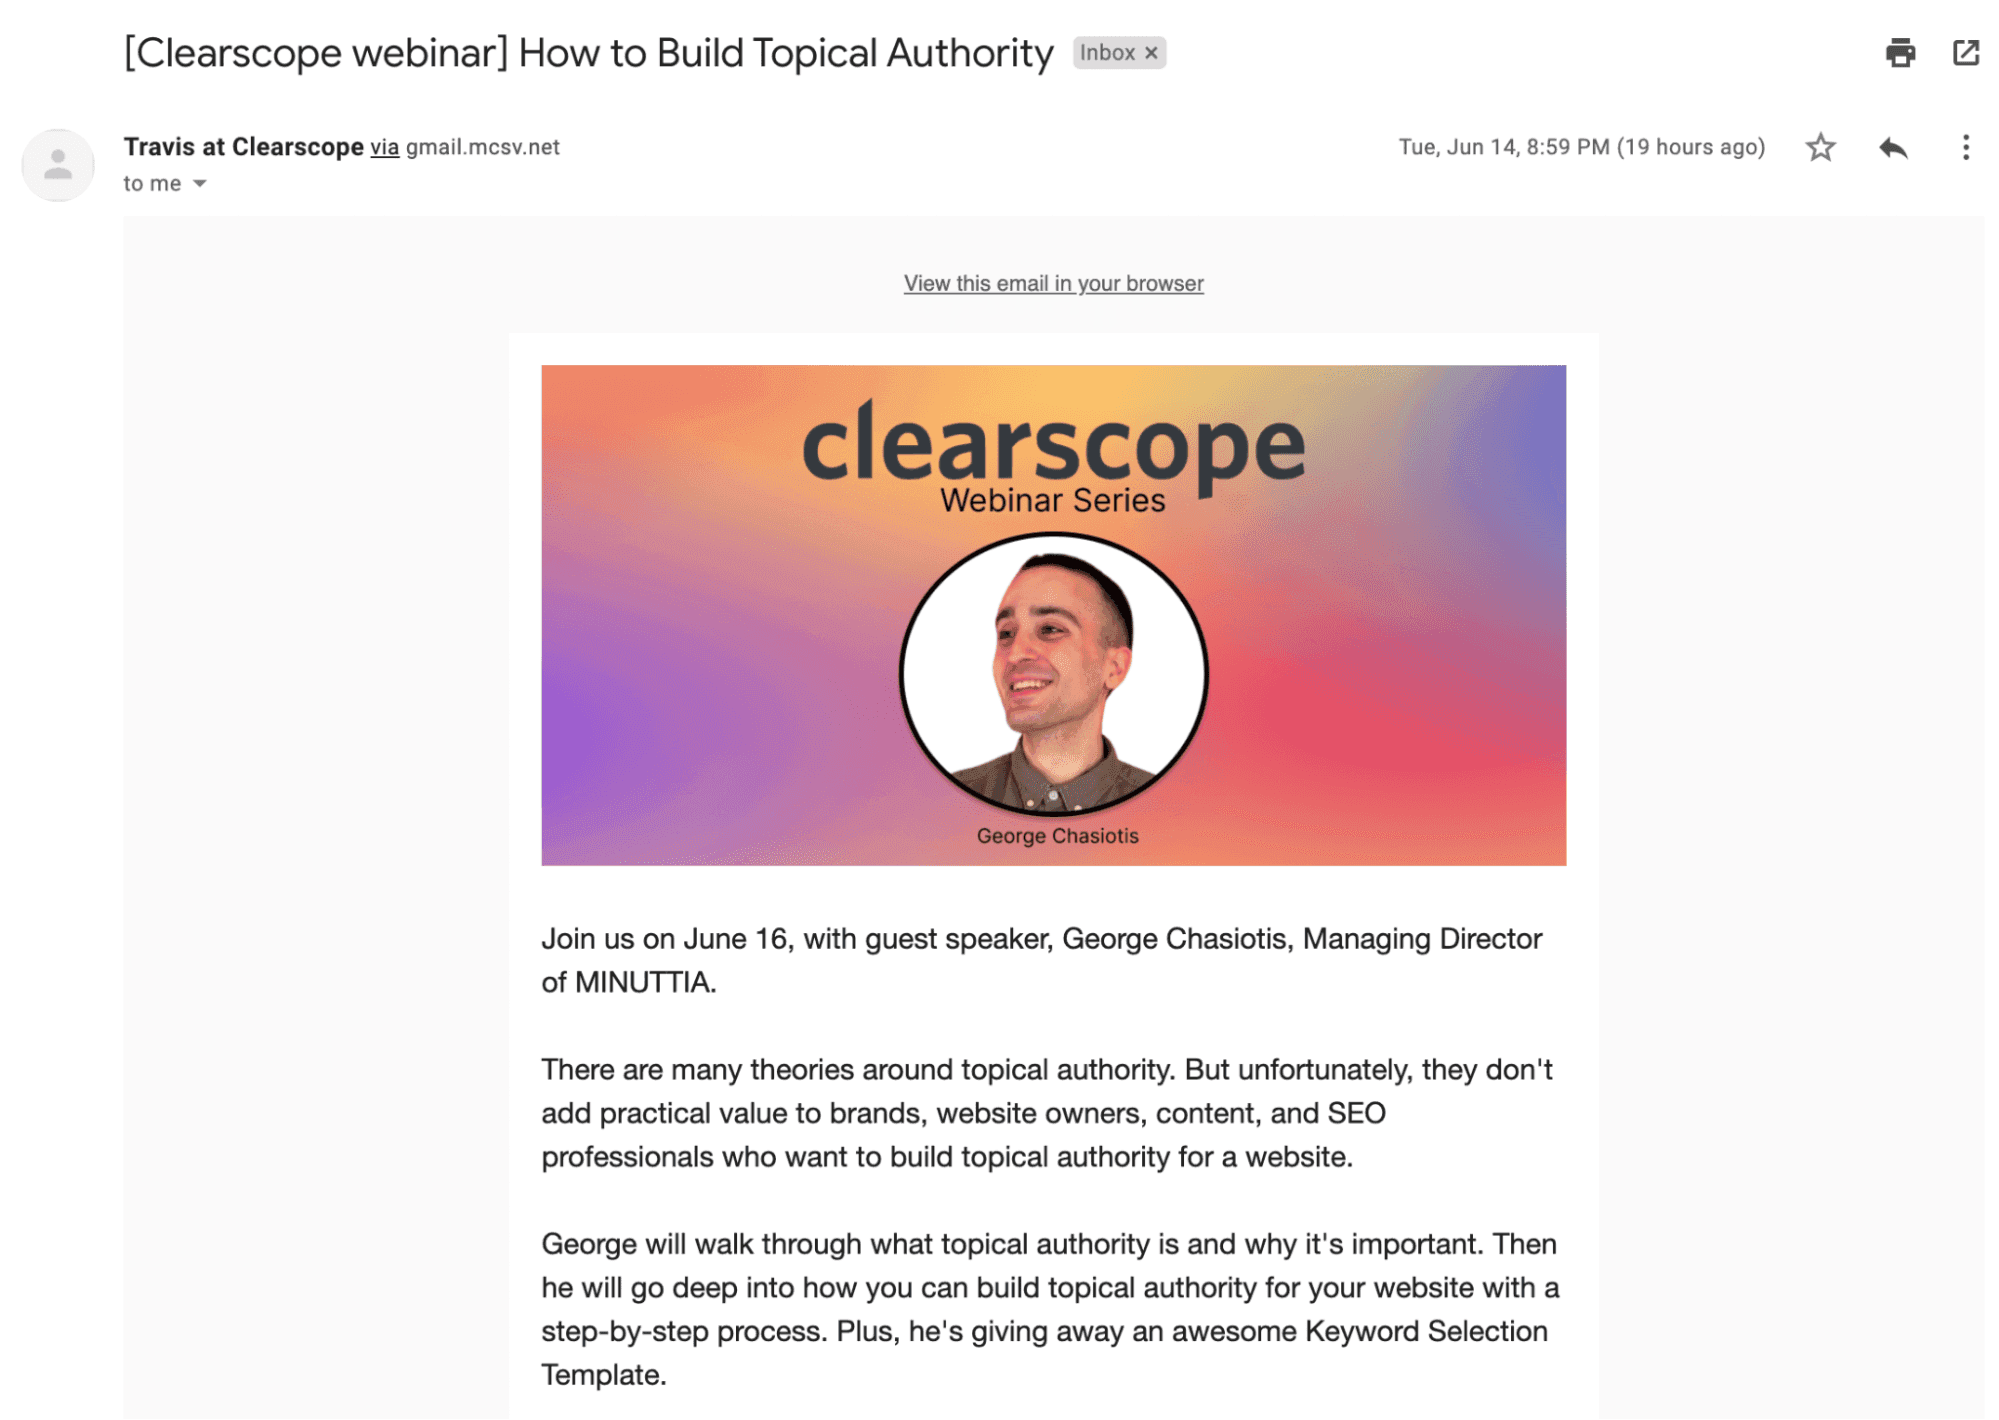 Example of an event email from Clearscope